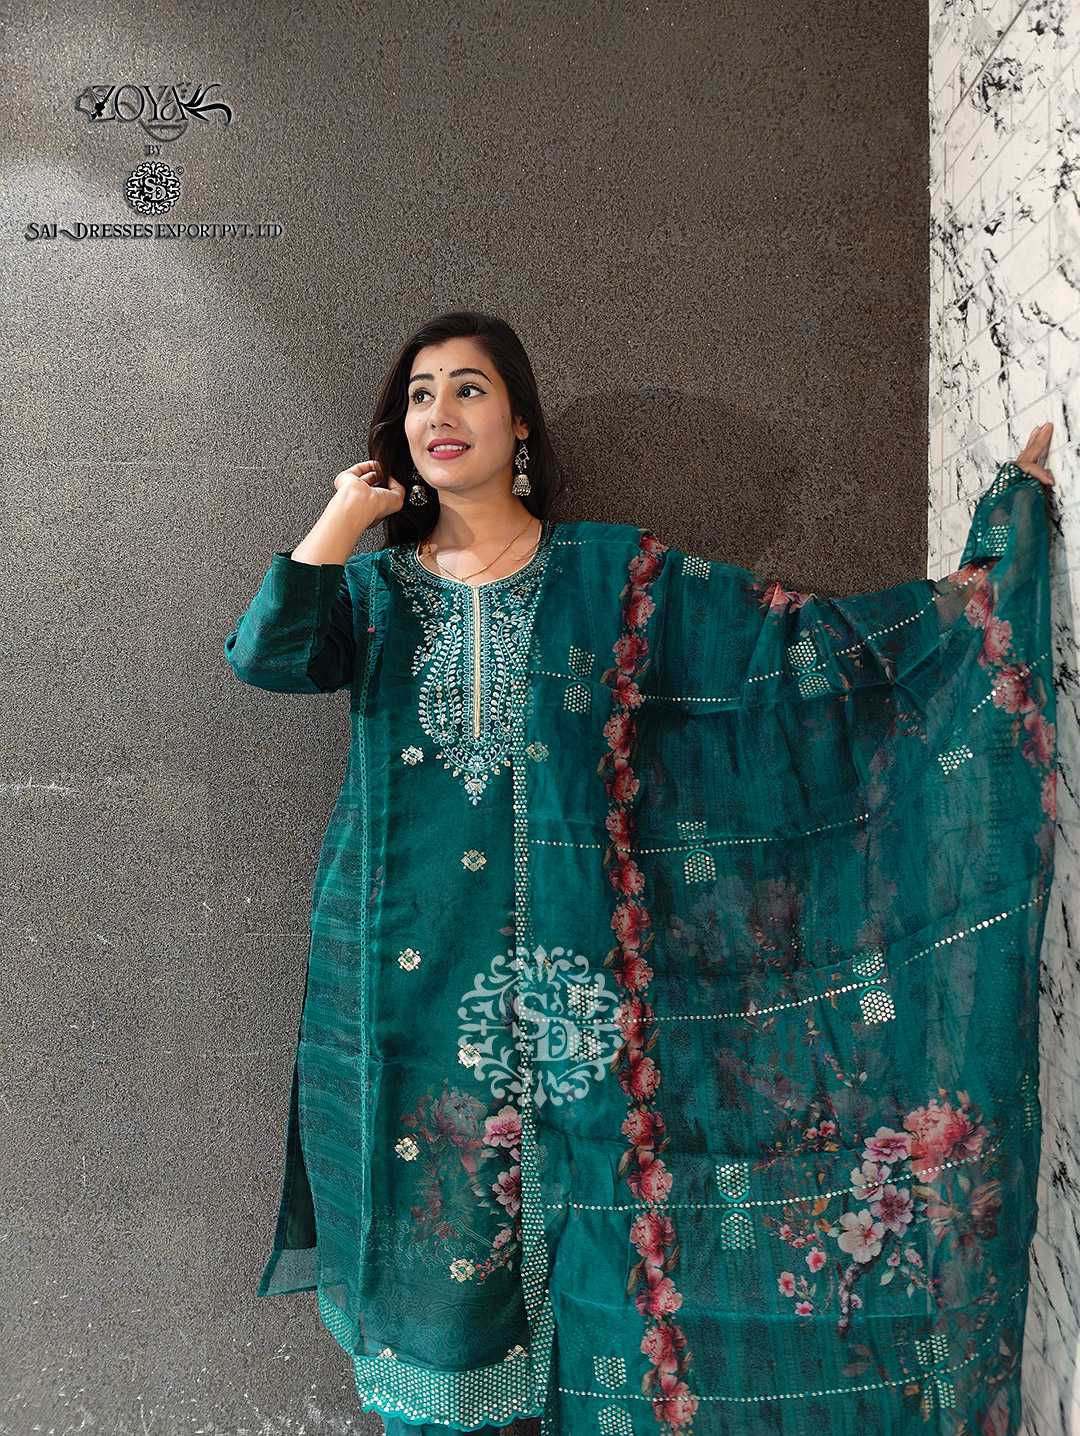 SAI DRESSES PRESENT D.NO SD1052 TO SD1055 READY TO EXCLUSIVE FESTIVE WEAR DESIGNER PAKISTANI 3 PIECE CONCEPT COMBO COLLECTION IN WHOLESALE RATE IN SURAT